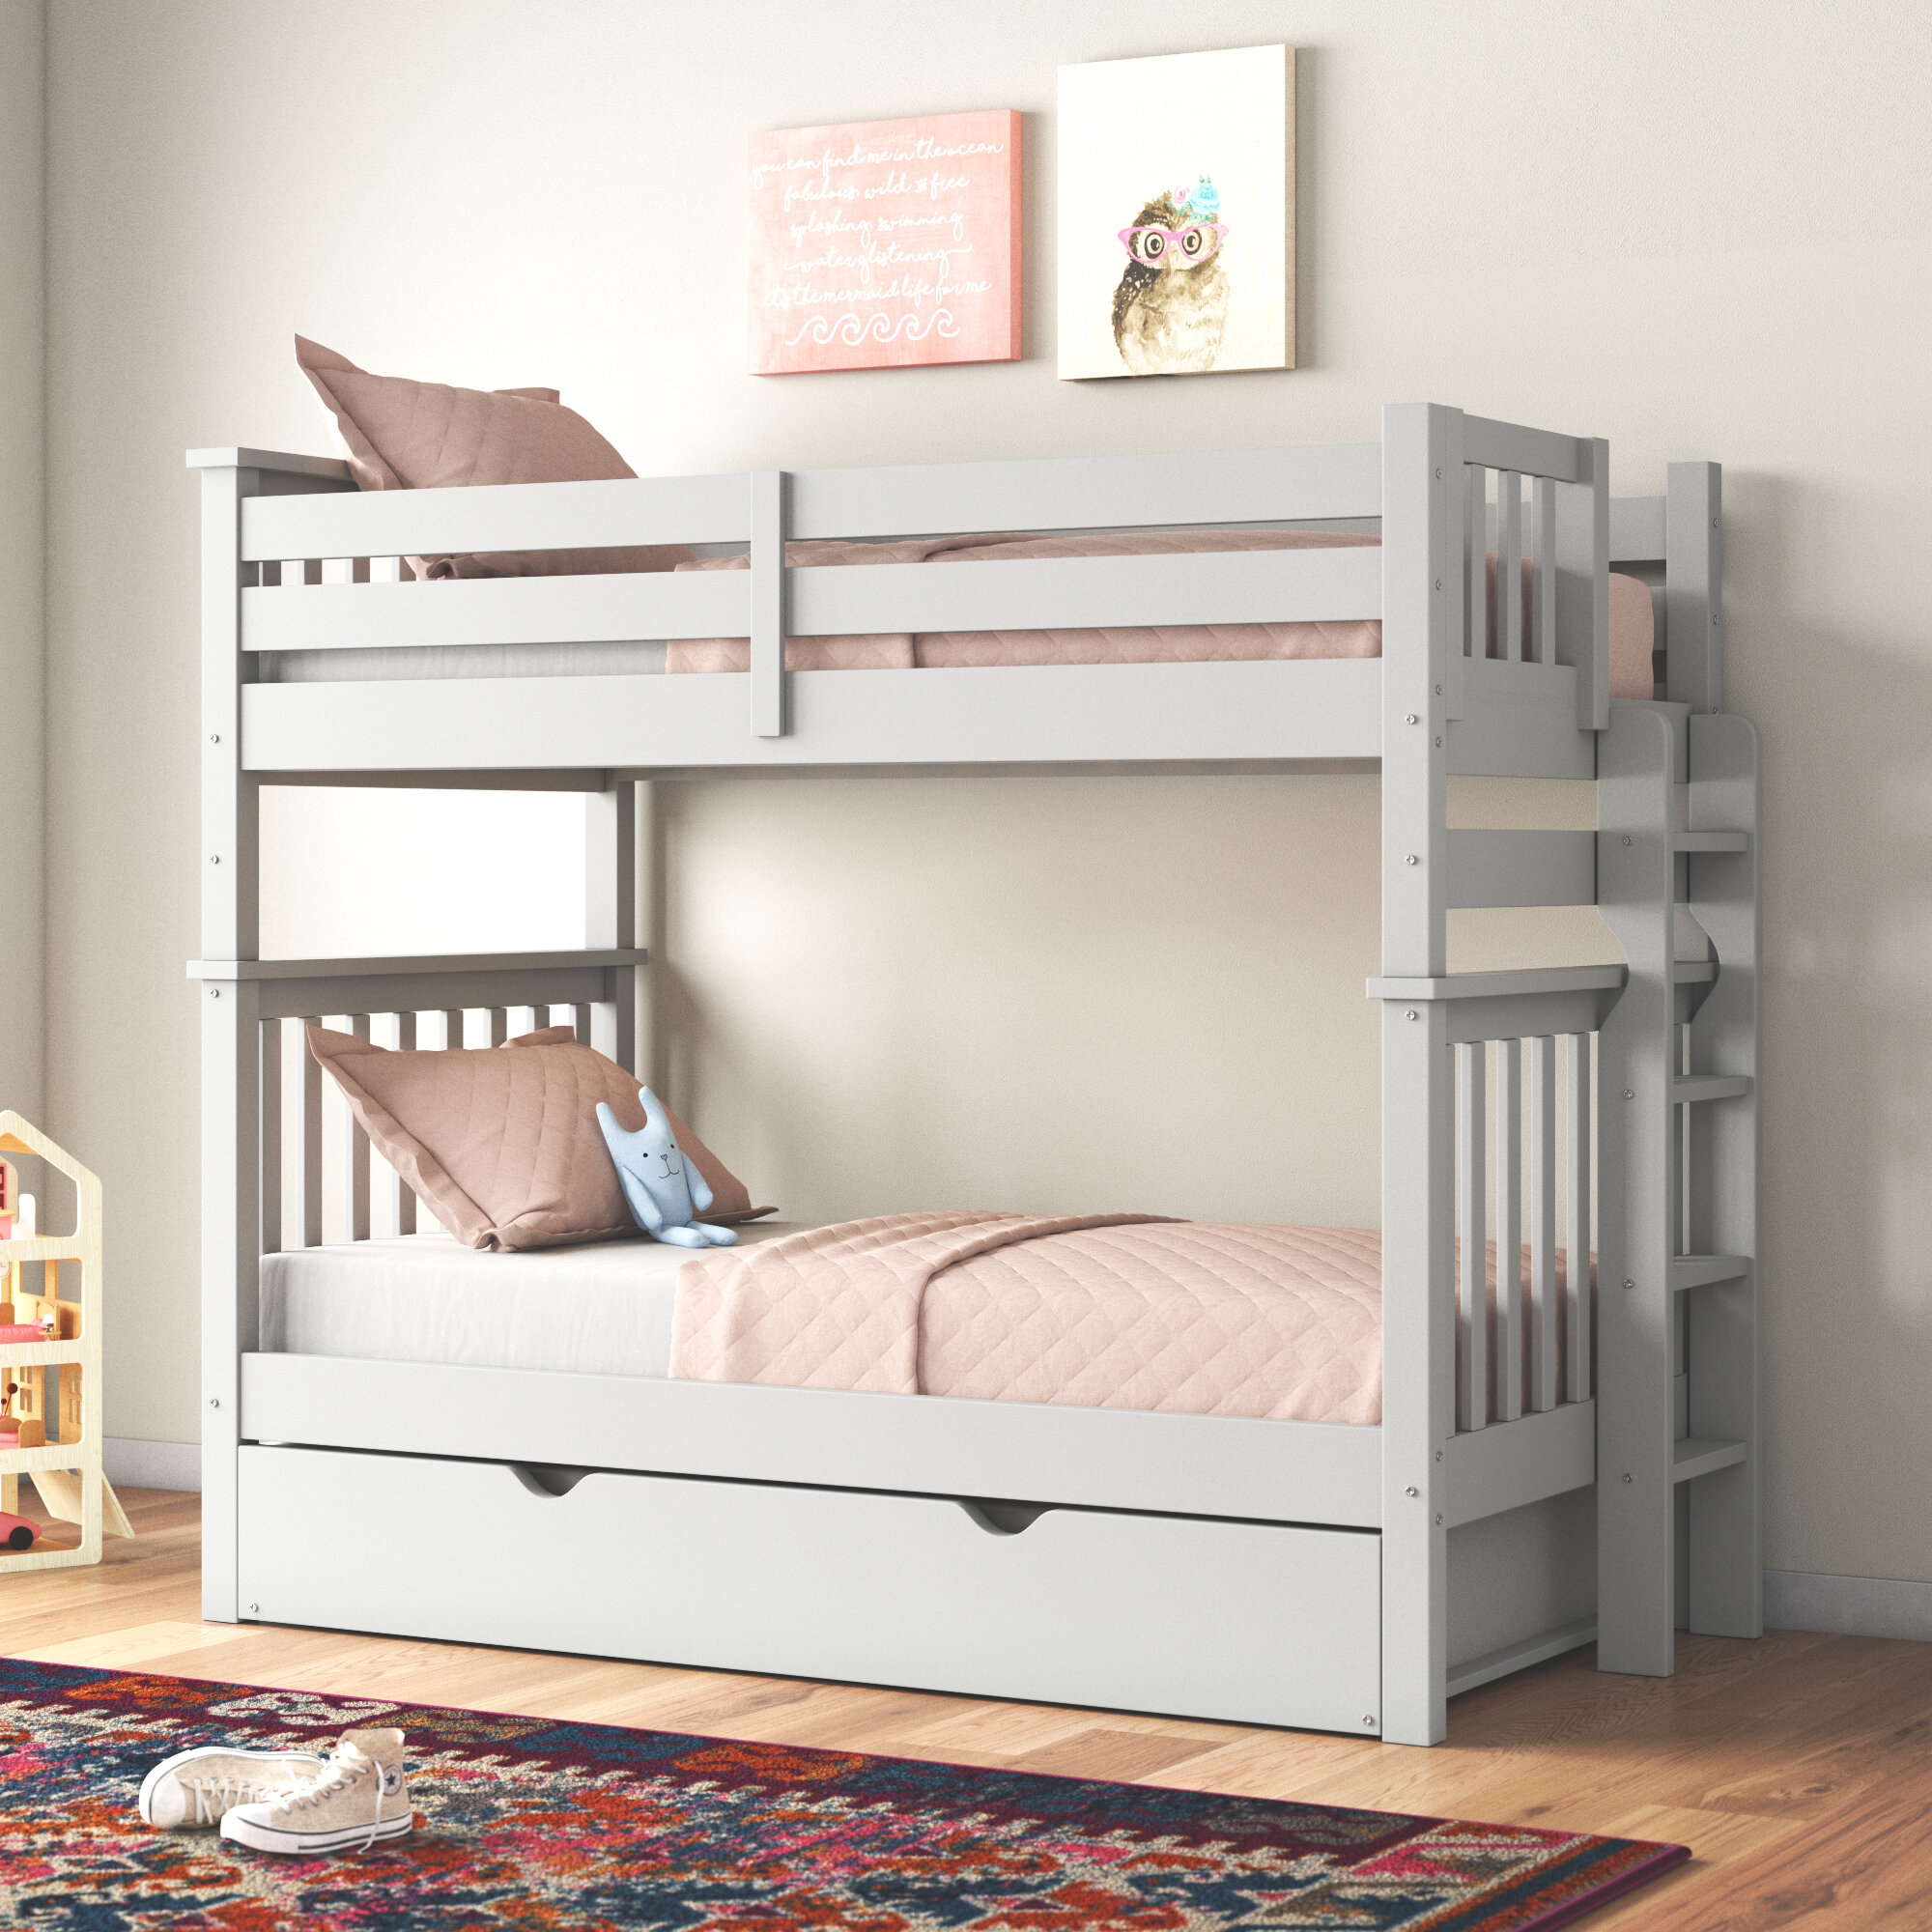 Twin over Twin over Twin Bed Triple Kids Bunk Bed Frame Bedroom Adult Children 